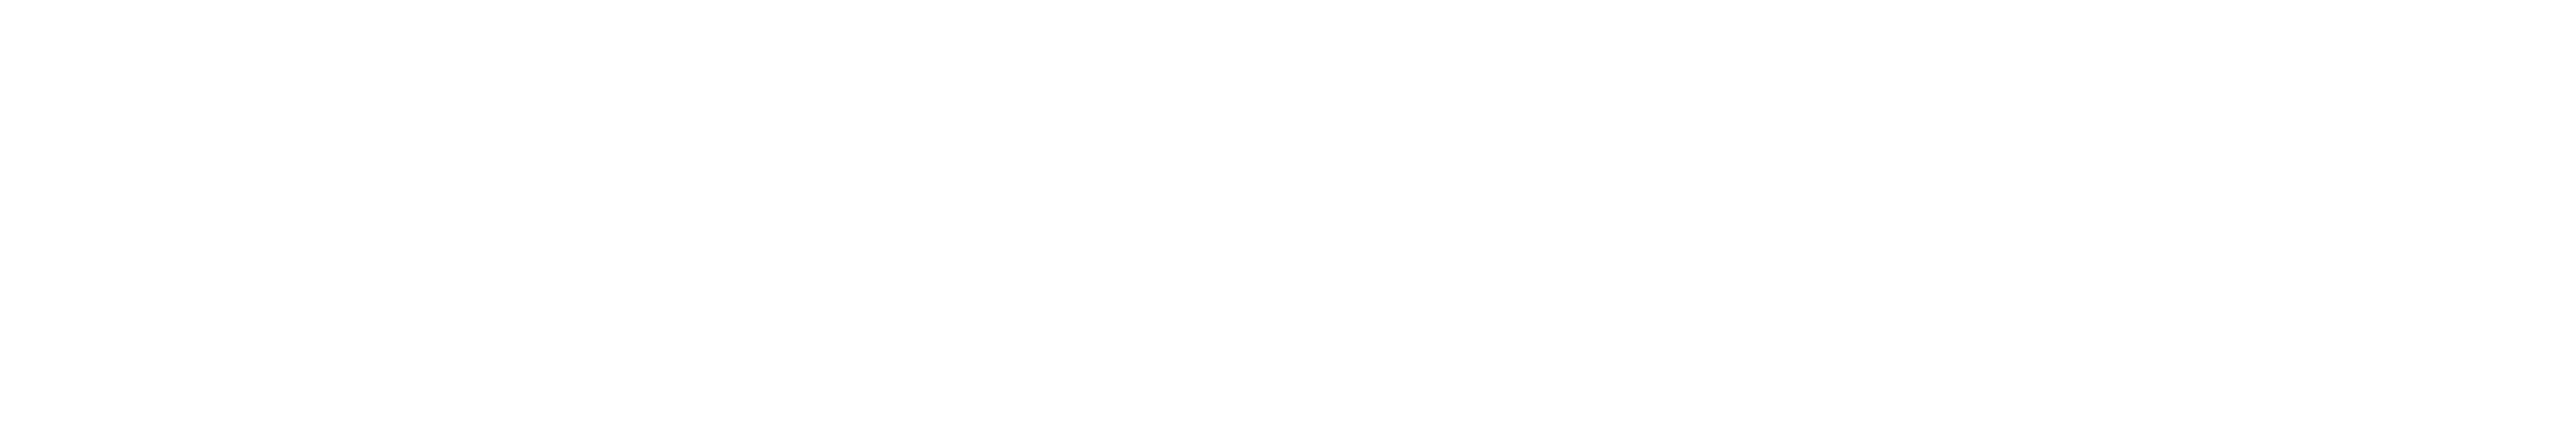 Dover, Delaware, Customers Natural Gas Outage Information